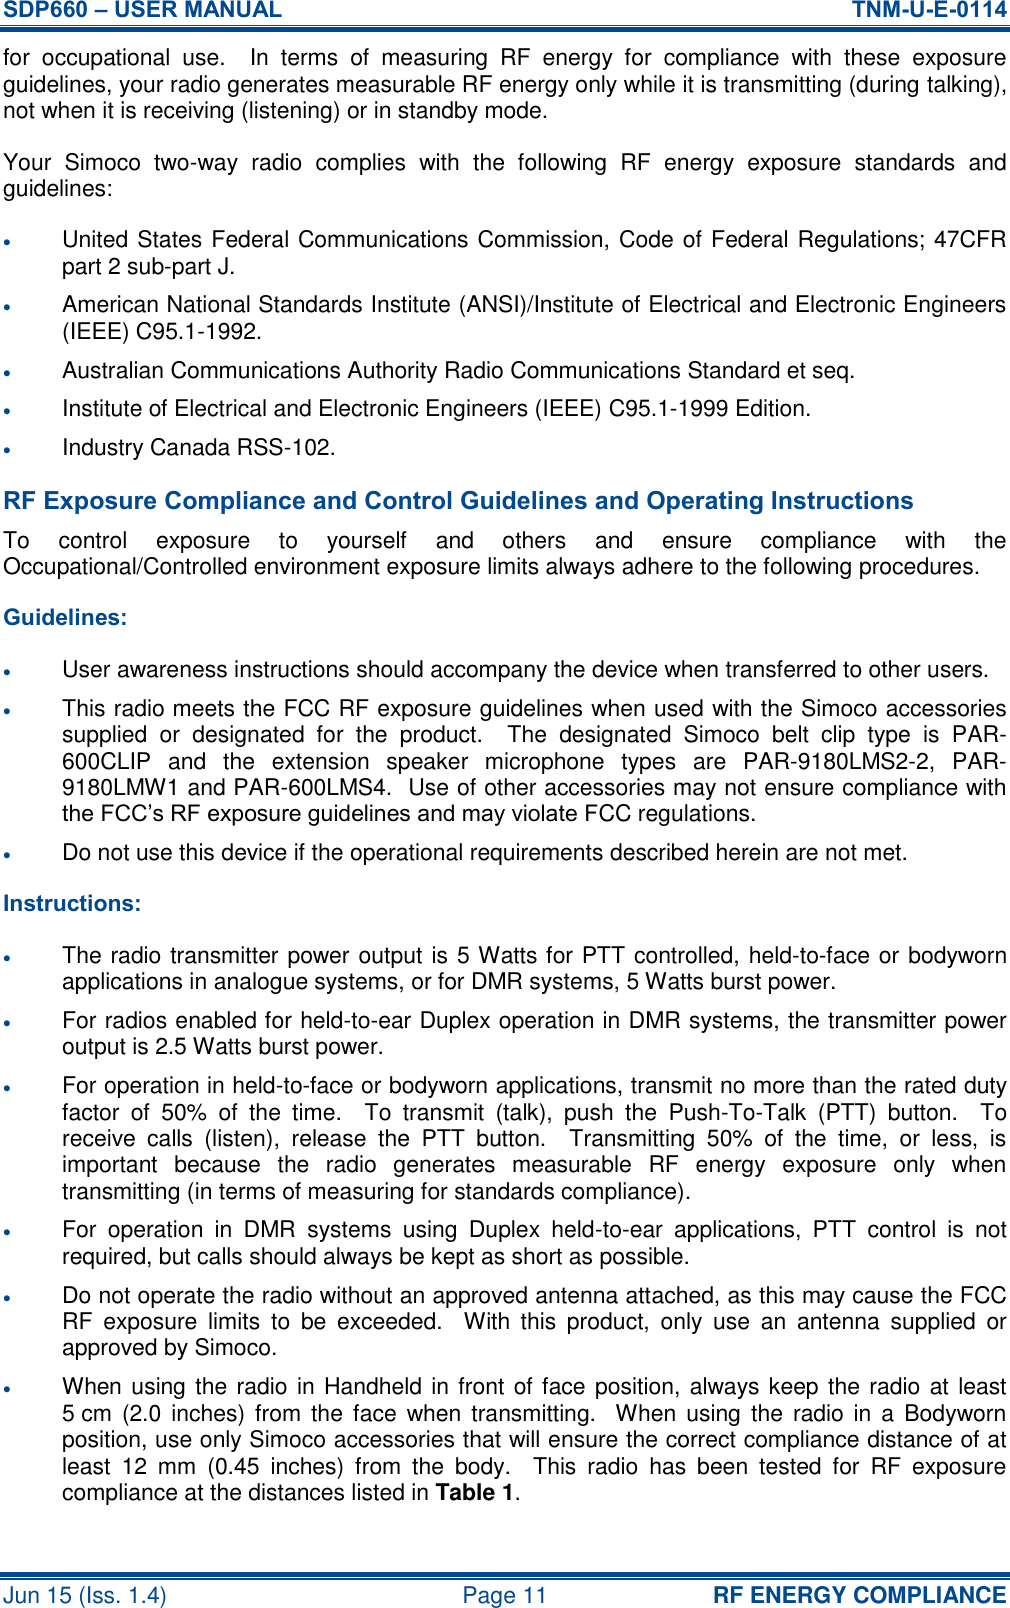 SDP660 – USER MANUAL  TNM-U-E-0114 Jun 15 (Iss. 1.4)  Page 11 RF ENERGY COMPLIANCE for  occupational  use.    In  terms  of  measuring  RF  energy  for  compliance  with  these  exposure guidelines, your radio generates measurable RF energy only while it is transmitting (during talking), not when it is receiving (listening) or in standby mode. Your  Simoco  two-way  radio  complies  with  the  following  RF  energy  exposure  standards  and guidelines:  United States Federal Communications Commission, Code of Federal Regulations; 47CFR part 2 sub-part J.  American National Standards Institute (ANSI)/Institute of Electrical and Electronic Engineers (IEEE) C95.1-1992.  Australian Communications Authority Radio Communications Standard et seq.  Institute of Electrical and Electronic Engineers (IEEE) C95.1-1999 Edition.  Industry Canada RSS-102. RF Exposure Compliance and Control Guidelines and Operating Instructions To  control  exposure  to  yourself  and  others  and  ensure  compliance  with  the Occupational/Controlled environment exposure limits always adhere to the following procedures. Guidelines:  User awareness instructions should accompany the device when transferred to other users.  This radio meets the FCC RF exposure guidelines when used with the Simoco accessories supplied  or  designated  for  the  product.    The  designated  Simoco  belt  clip  type  is  PAR-600CLIP  and  the  extension  speaker  microphone  types  are  PAR-9180LMS2-2,  PAR-9180LMW1 and PAR-600LMS4.  Use of other accessories may not ensure compliance with the FCC’s RF exposure guidelines and may violate FCC regulations.  Do not use this device if the operational requirements described herein are not met. Instructions:  The radio transmitter power output is 5 Watts for PTT controlled, held-to-face or bodyworn applications in analogue systems, or for DMR systems, 5 Watts burst power.  For radios enabled for held-to-ear Duplex operation in DMR systems, the transmitter power output is 2.5 Watts burst power.  For operation in held-to-face or bodyworn applications, transmit no more than the rated duty factor  of  50%  of  the  time.    To  transmit  (talk),  push  the  Push-To-Talk  (PTT)  button.    To receive  calls  (listen),  release  the  PTT  button.    Transmitting  50%  of  the  time,  or  less,  is important  because  the  radio  generates  measurable  RF  energy  exposure  only  when transmitting (in terms of measuring for standards compliance).  For  operation  in  DMR  systems  using  Duplex  held-to-ear  applications,  PTT  control  is  not required, but calls should always be kept as short as possible.  Do not operate the radio without an approved antenna attached, as this may cause the FCC RF  exposure  limits  to  be  exceeded.    With  this  product,  only  use  an  antenna  supplied  or approved by Simoco.  When using the radio in Handheld in front of face position, always keep the radio at least 5 cm  (2.0 inches)  from the  face when transmitting.  When using  the  radio in a  Bodyworn position, use only Simoco accessories that will ensure the correct compliance distance of at least  12  mm  (0.45  inches)  from  the  body.    This  radio  has  been  tested  for  RF  exposure compliance at the distances listed in Table 1. 